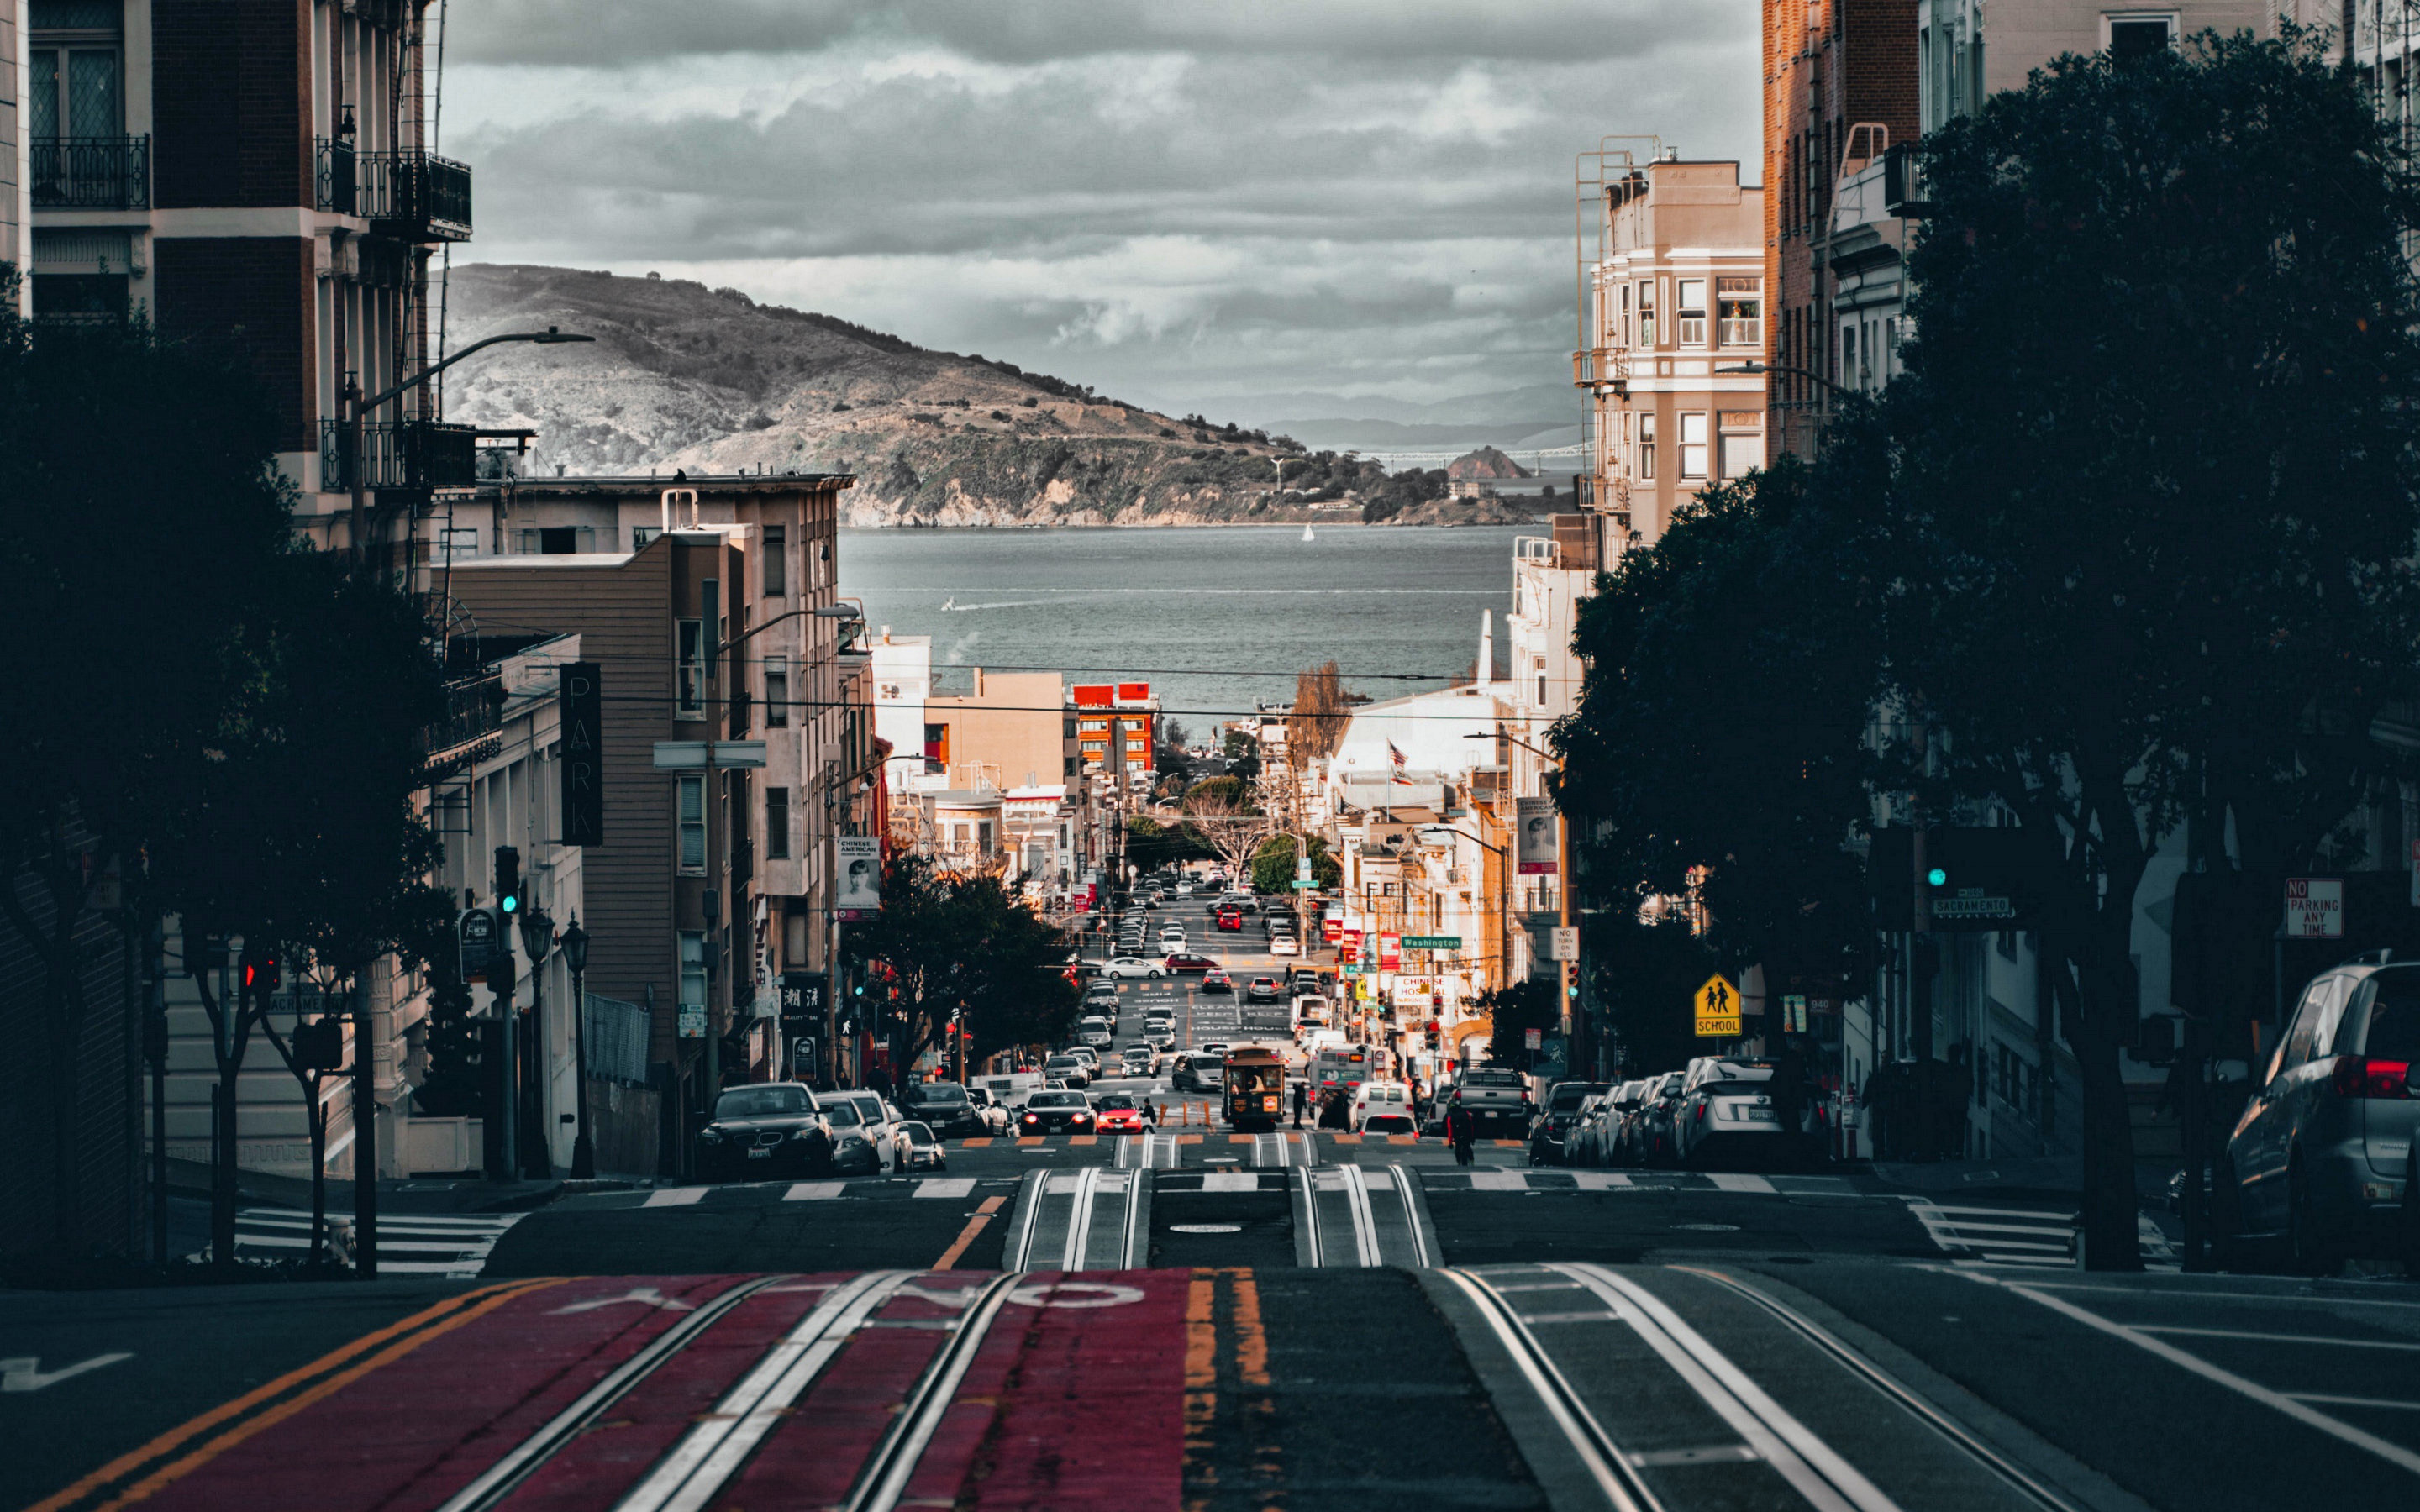 Download wallpaper San Francisco, 4k, street, hills, american cities, California, City of San Francisco, USA, Cities of California, America for desktop with resolution 2880x1800. High Quality HD picture wallpaper